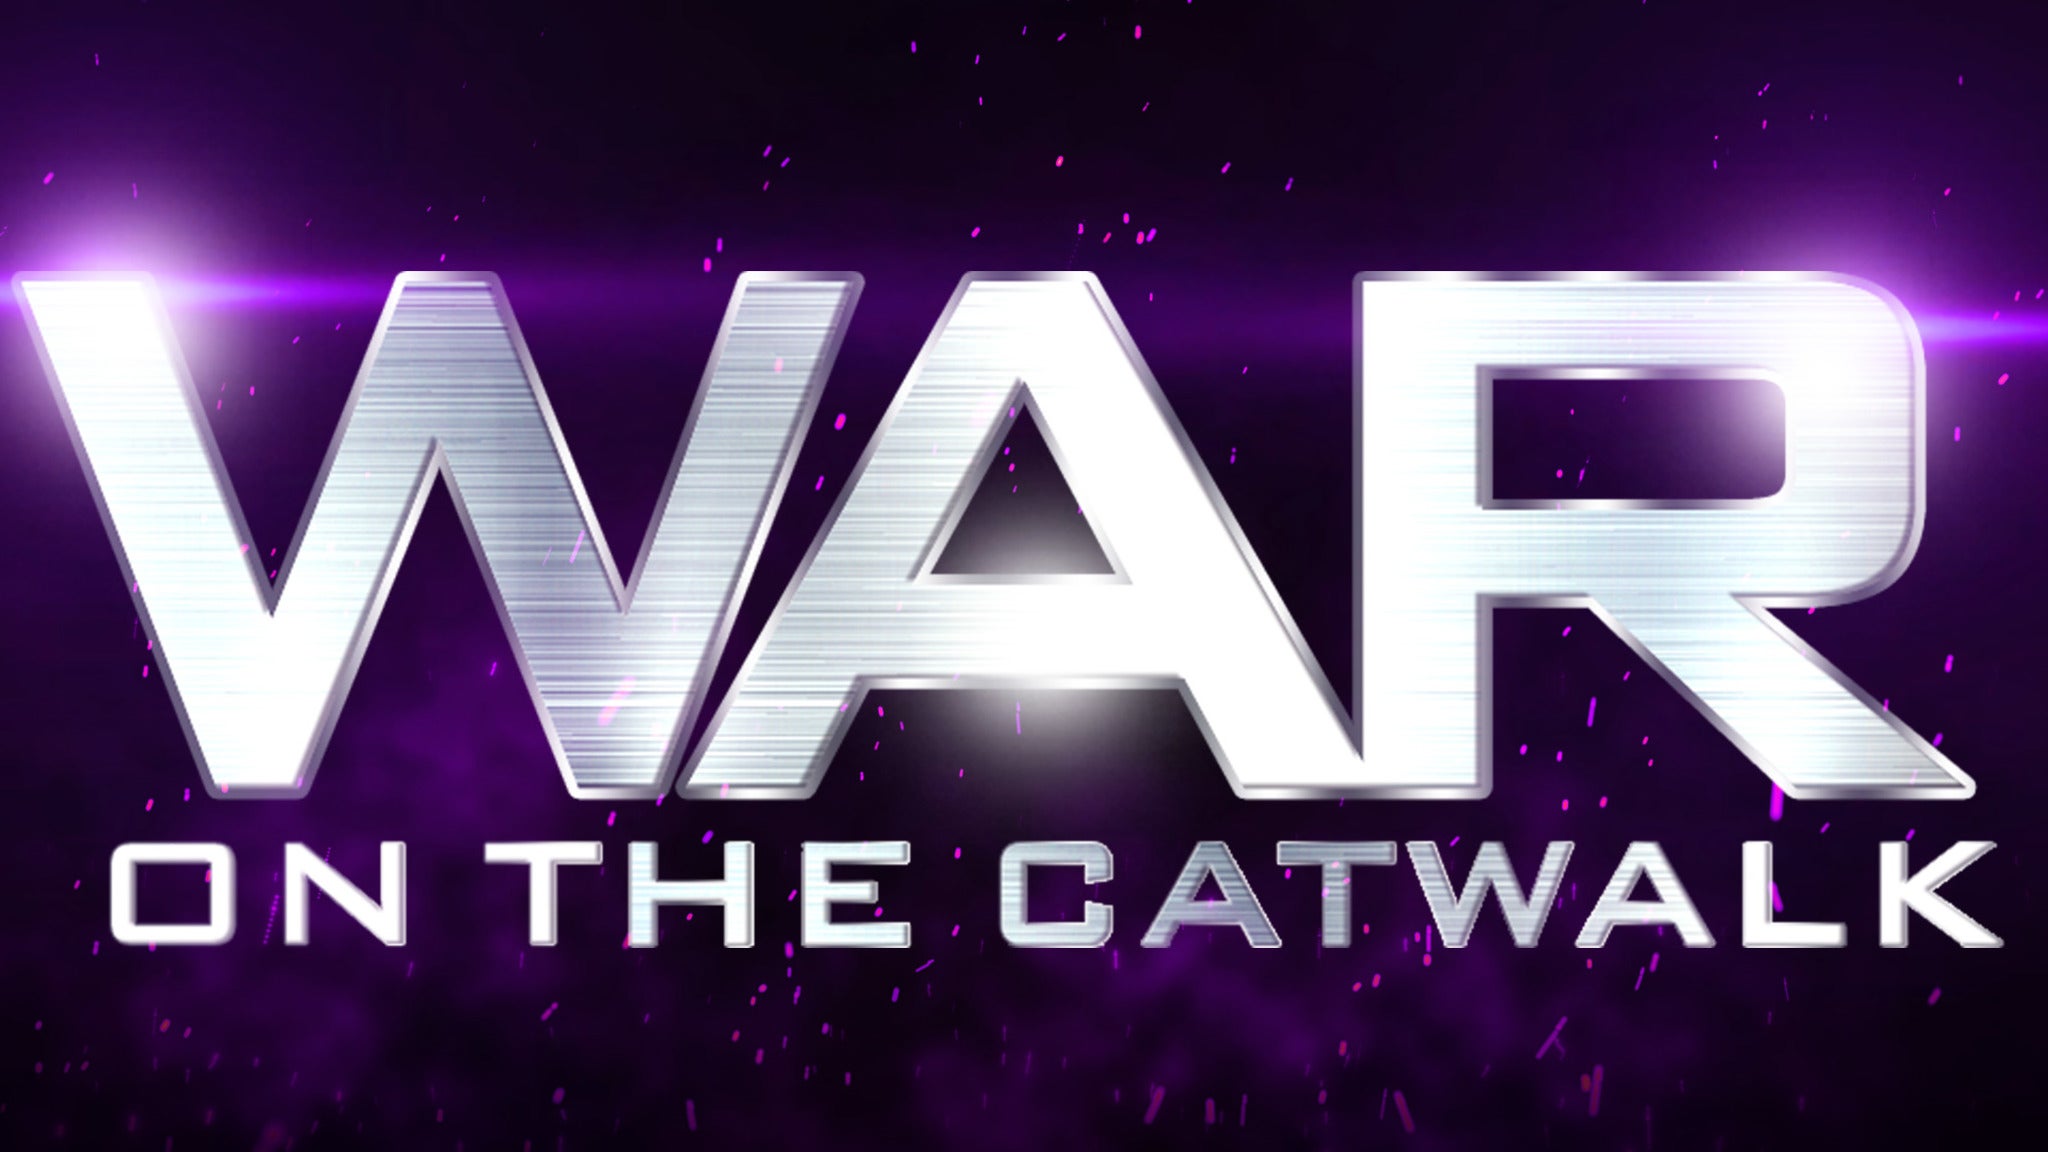 War On The Catwalk Tour - 2022 in Garden City promo photo for Exclusive presale offer code